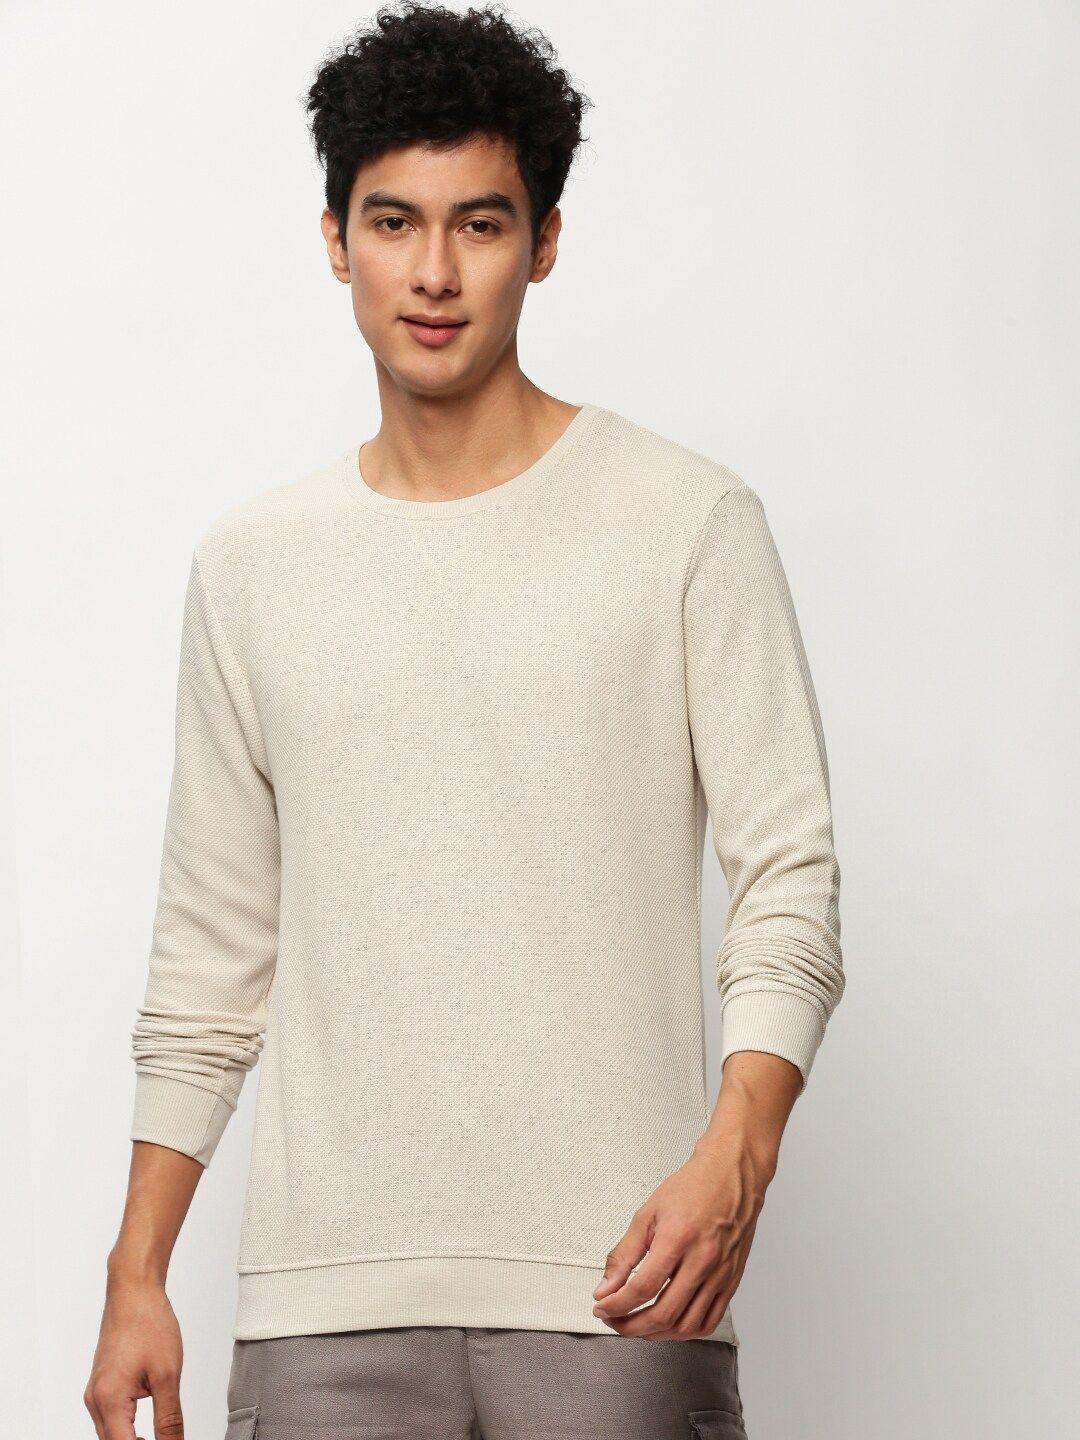 showoff round neck long sleeves cotton pullover